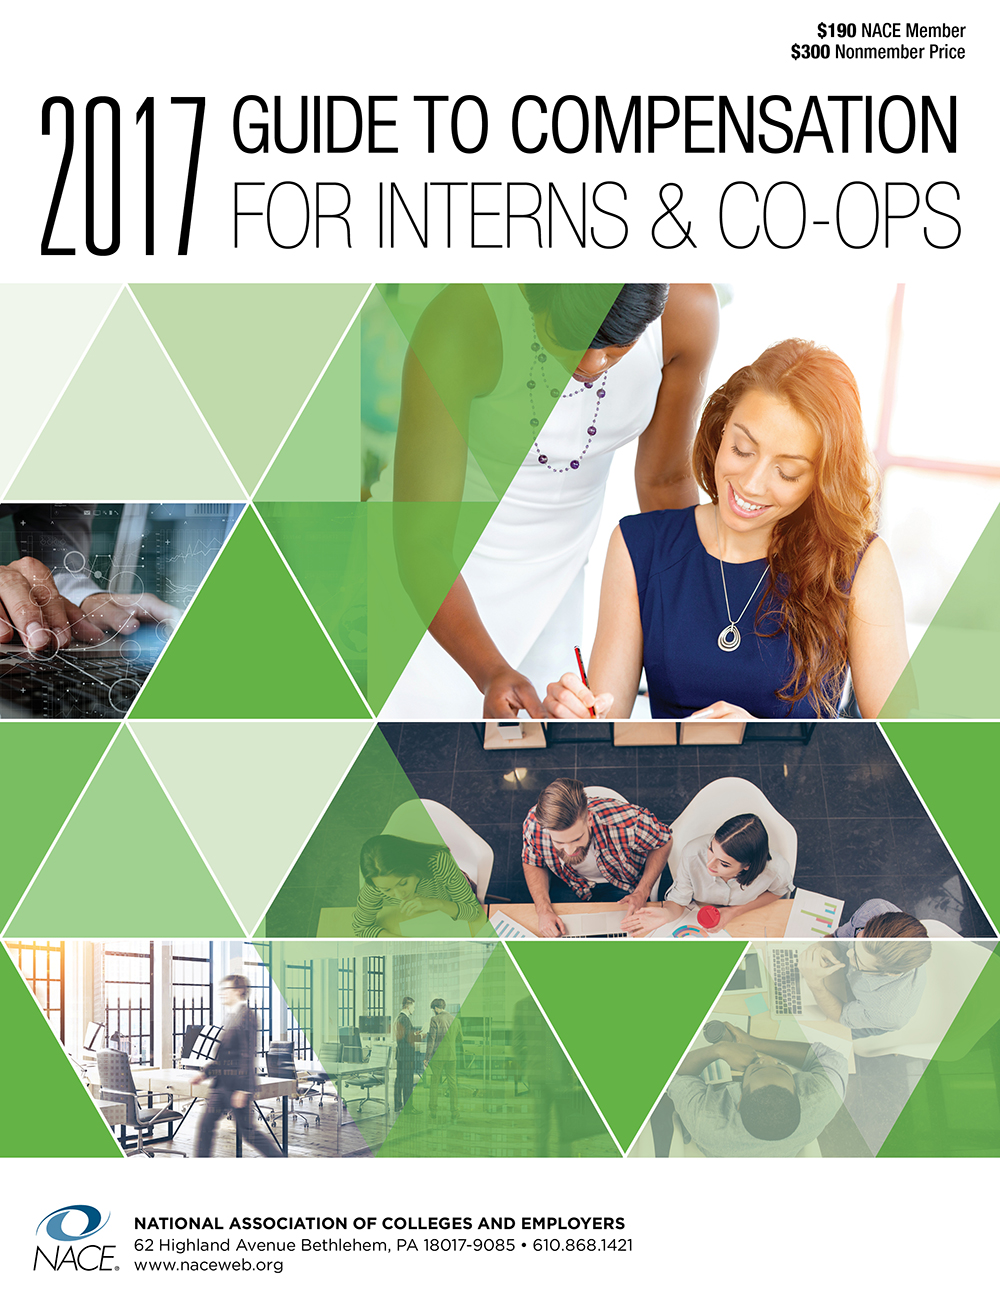 The NACE 2017 Guide to Compensation for Interns & Co-ops provides actual wage and benefit information by major, degree, year of study, company size, industry, and region.